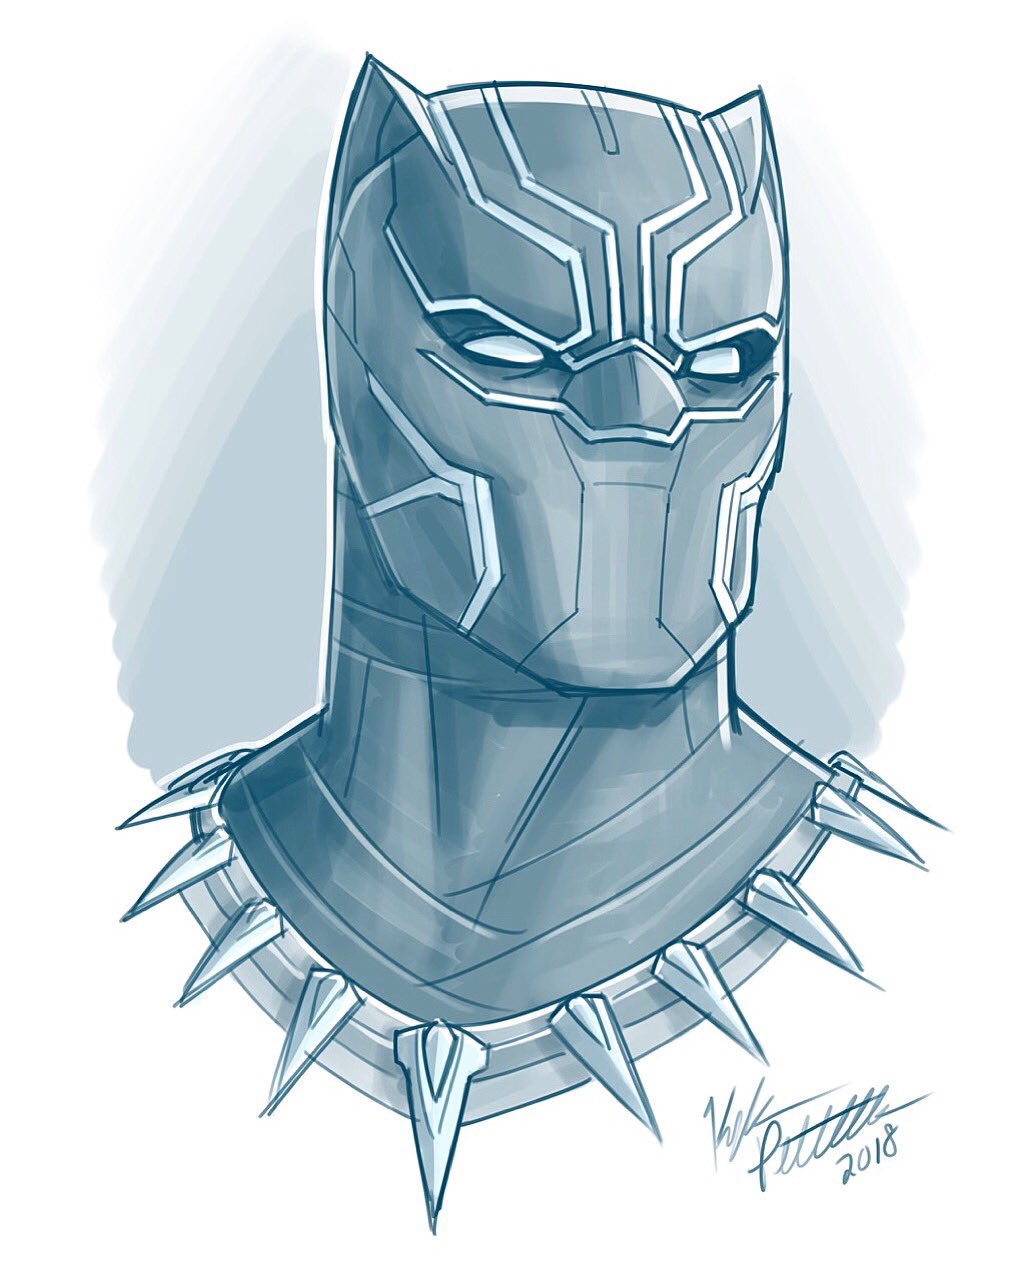 Kyle Petchock Art on Twitter: "Black Panther cool down sketch from